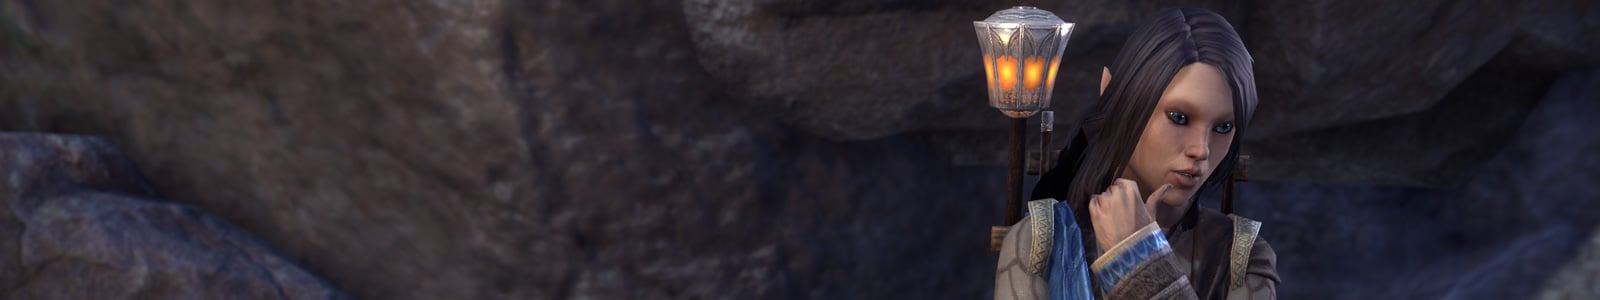 How to get the Deconstruct Assistant in ESO header